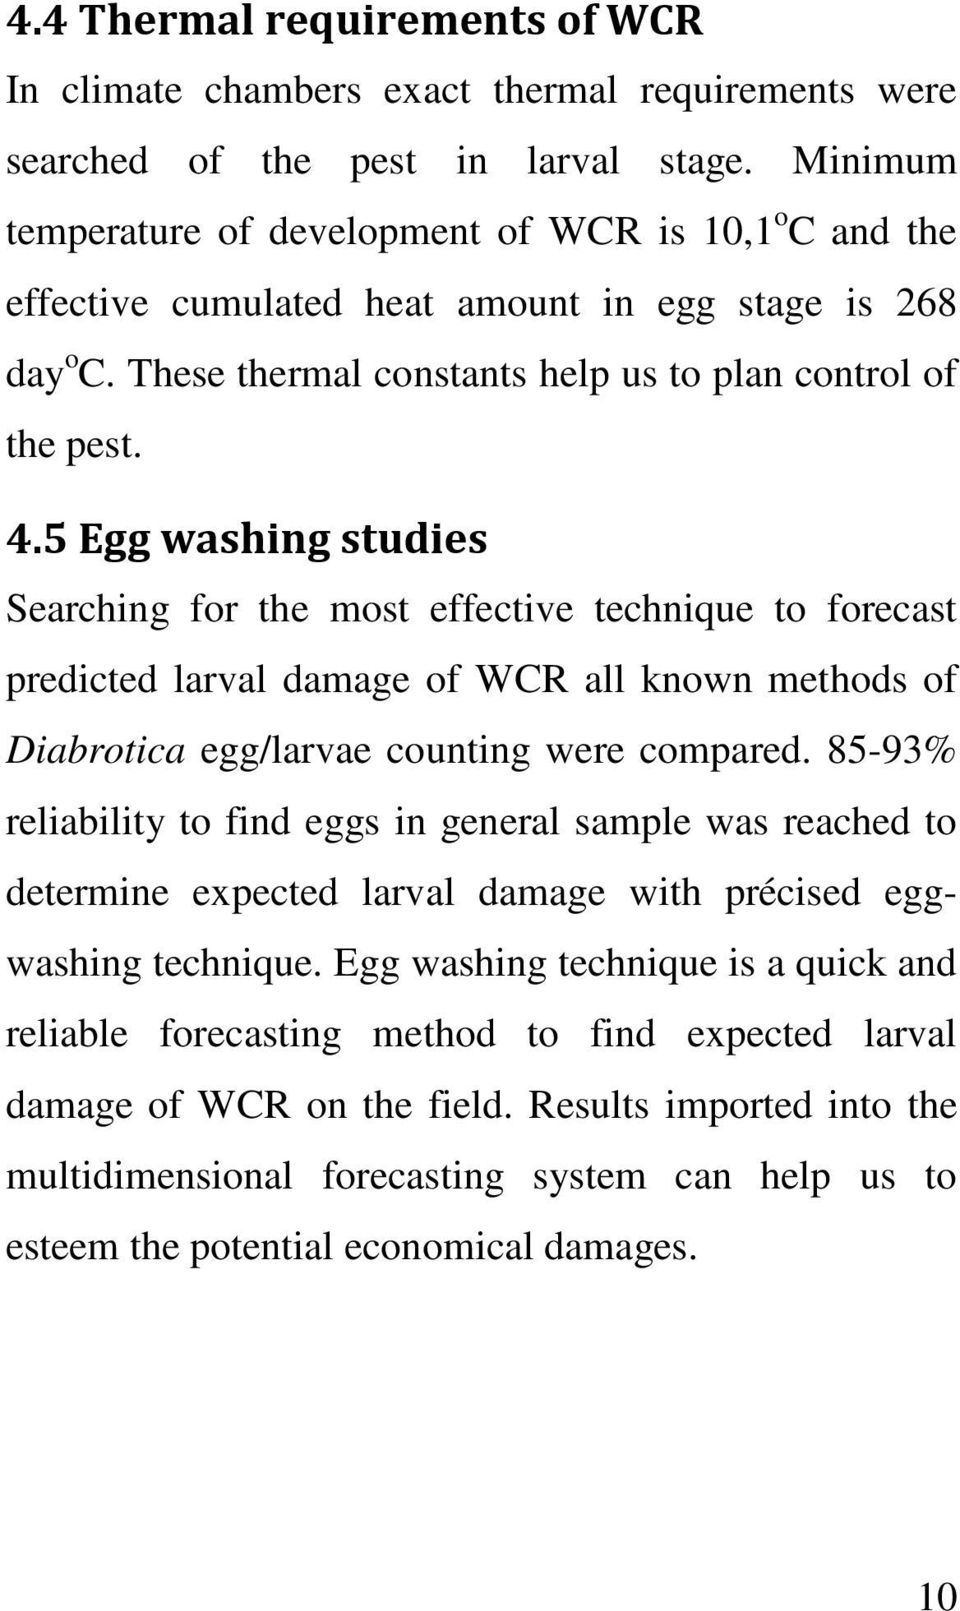 5 Egg washing studies Searching for the most effective technique to forecast predicted larval damage of WCR all known methods of Diabrotica egg/larvae counting were compared.